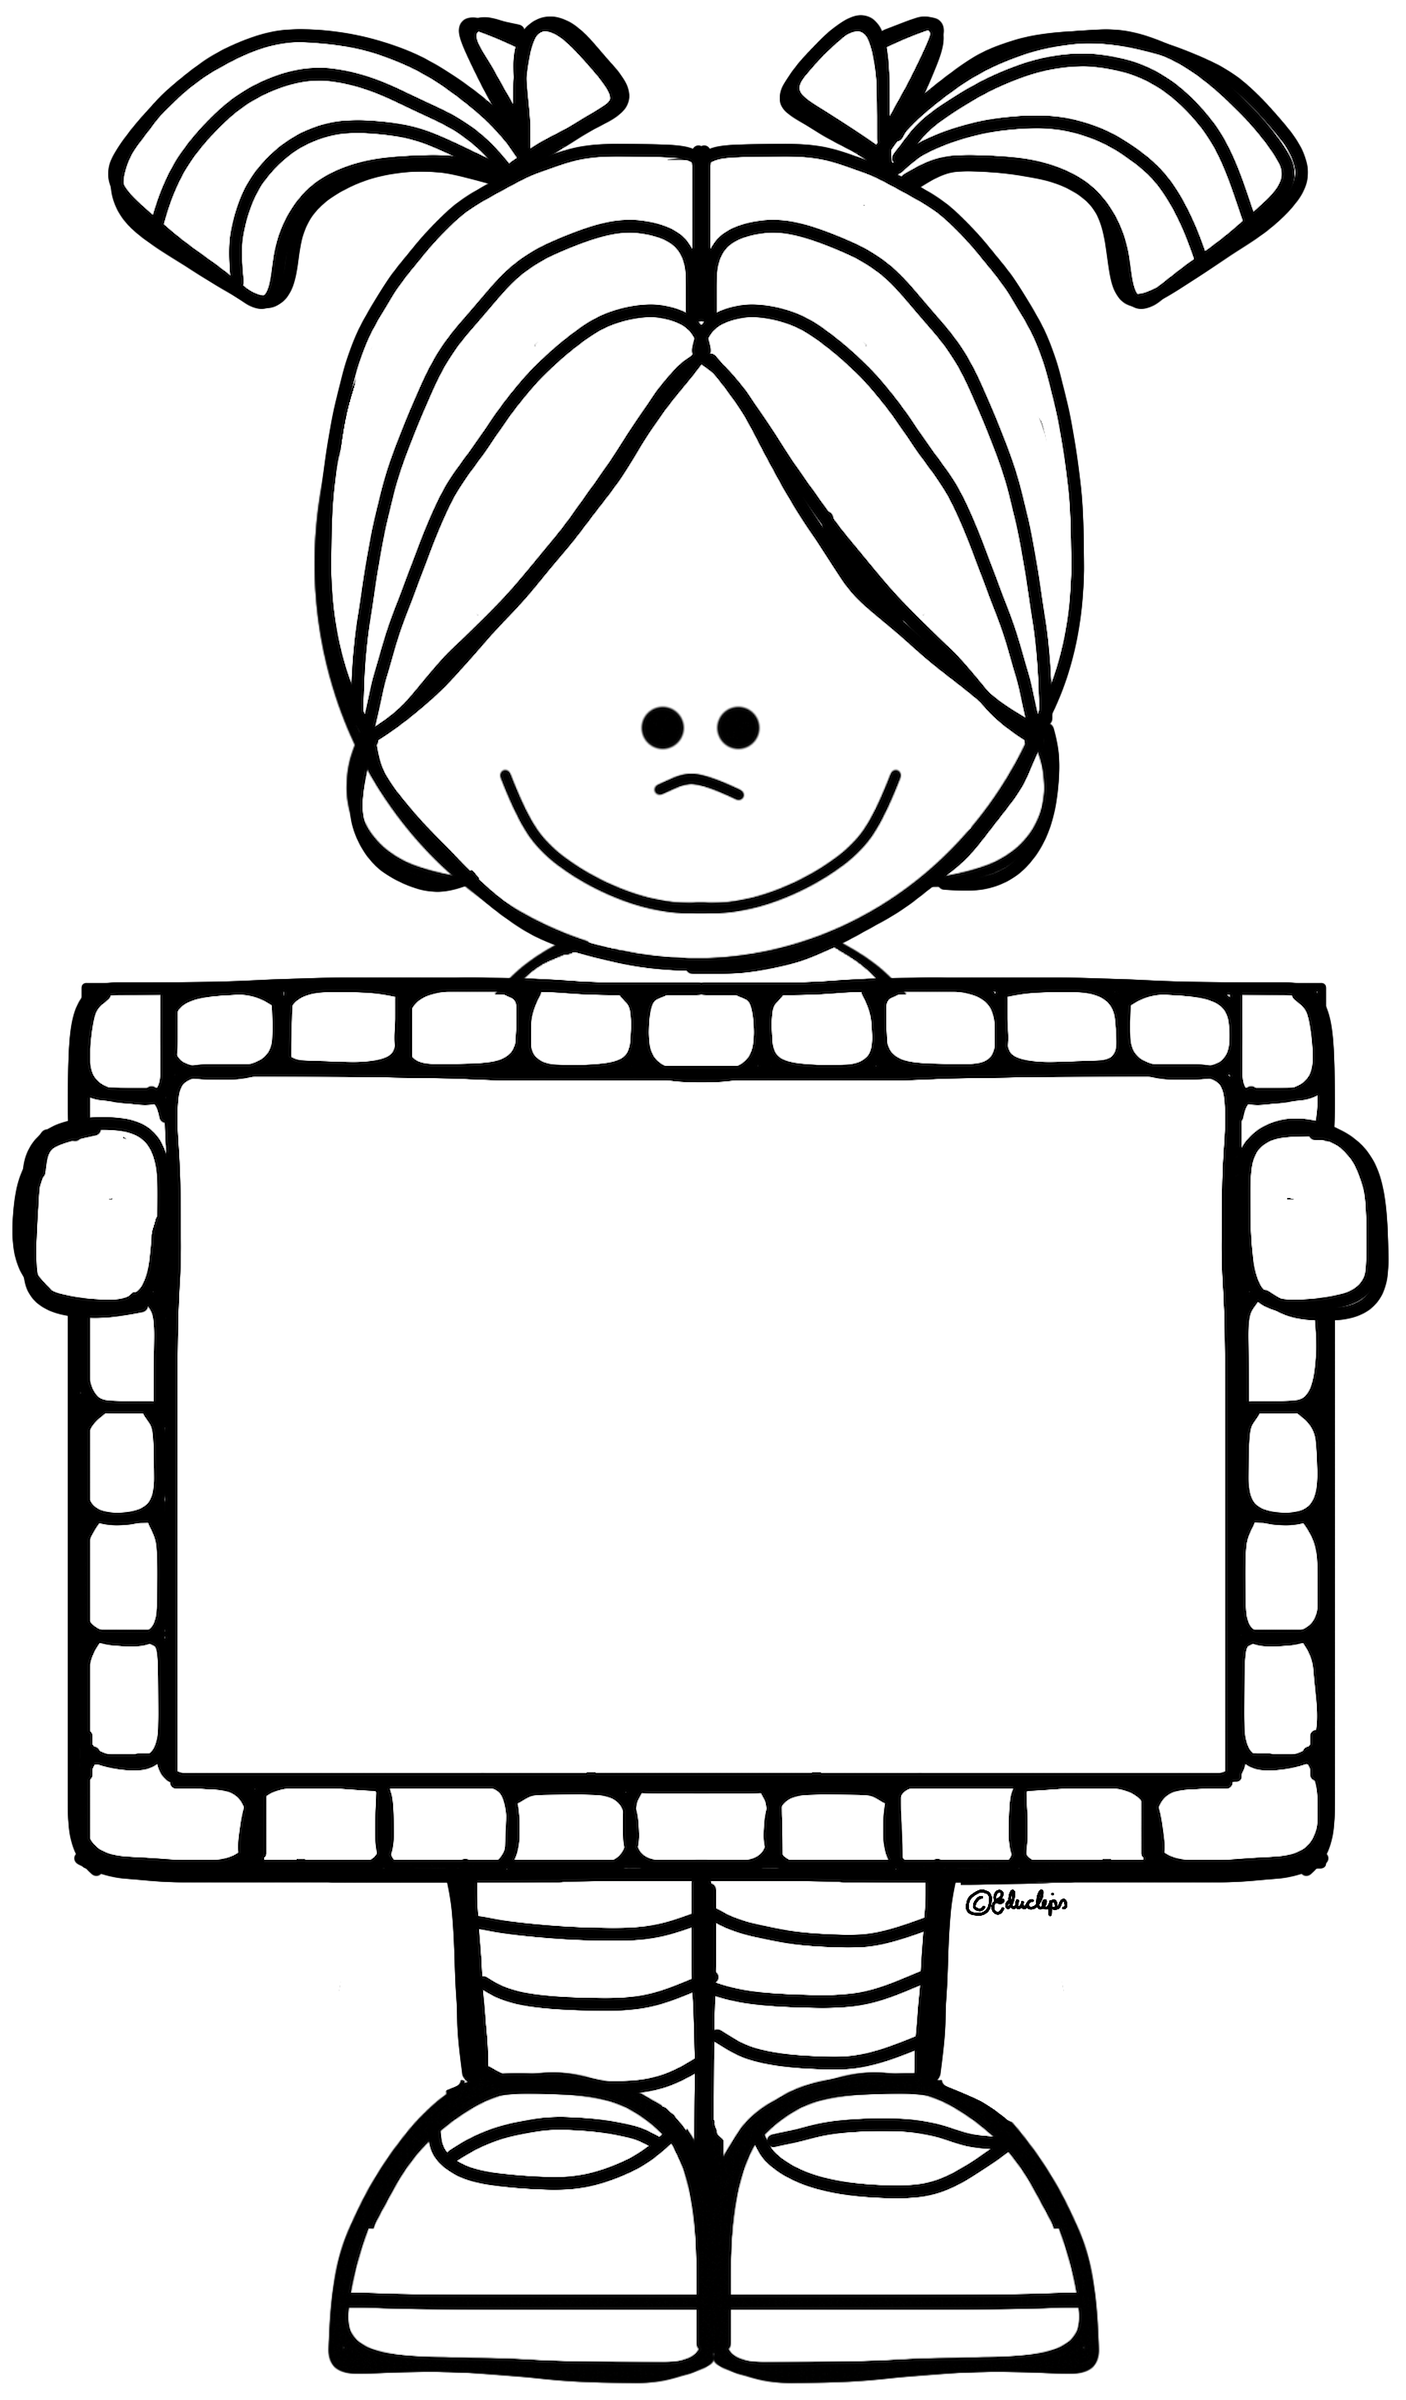 fraction clipart animated child